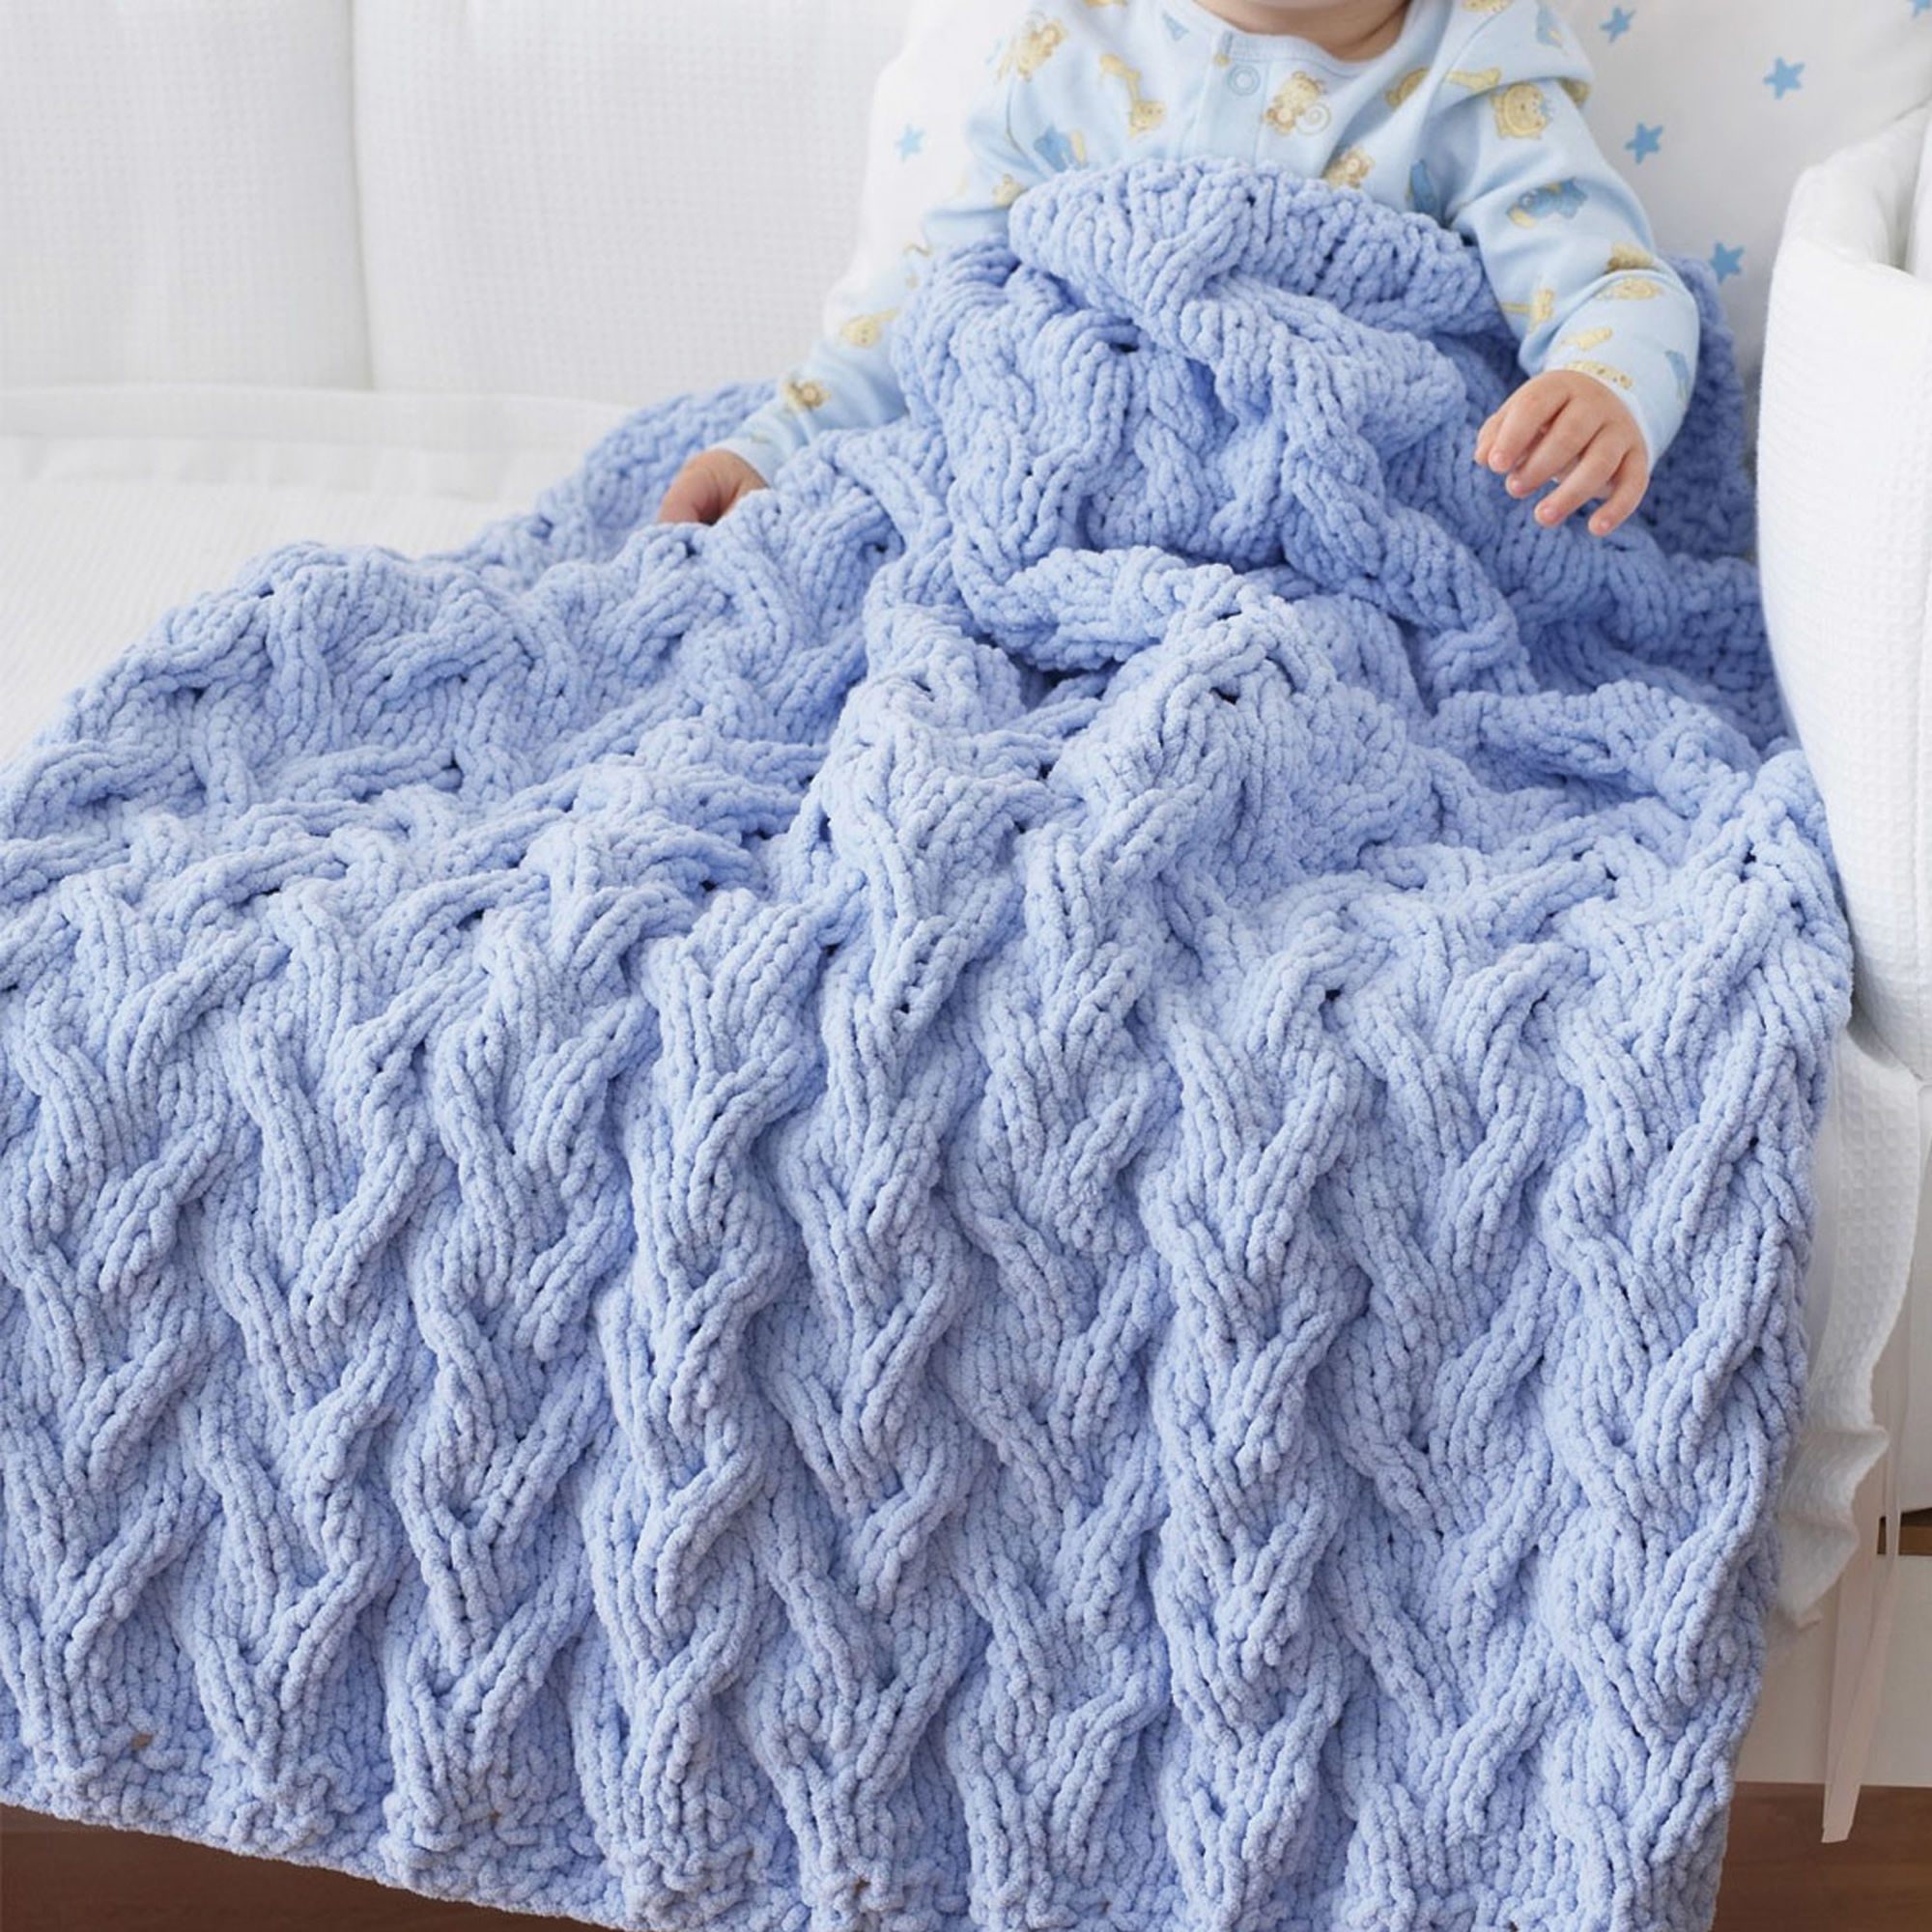 Knitting Patterns For Baby Blankets Free Lovely Cabled Ba Blanket Free Knitting Pattern